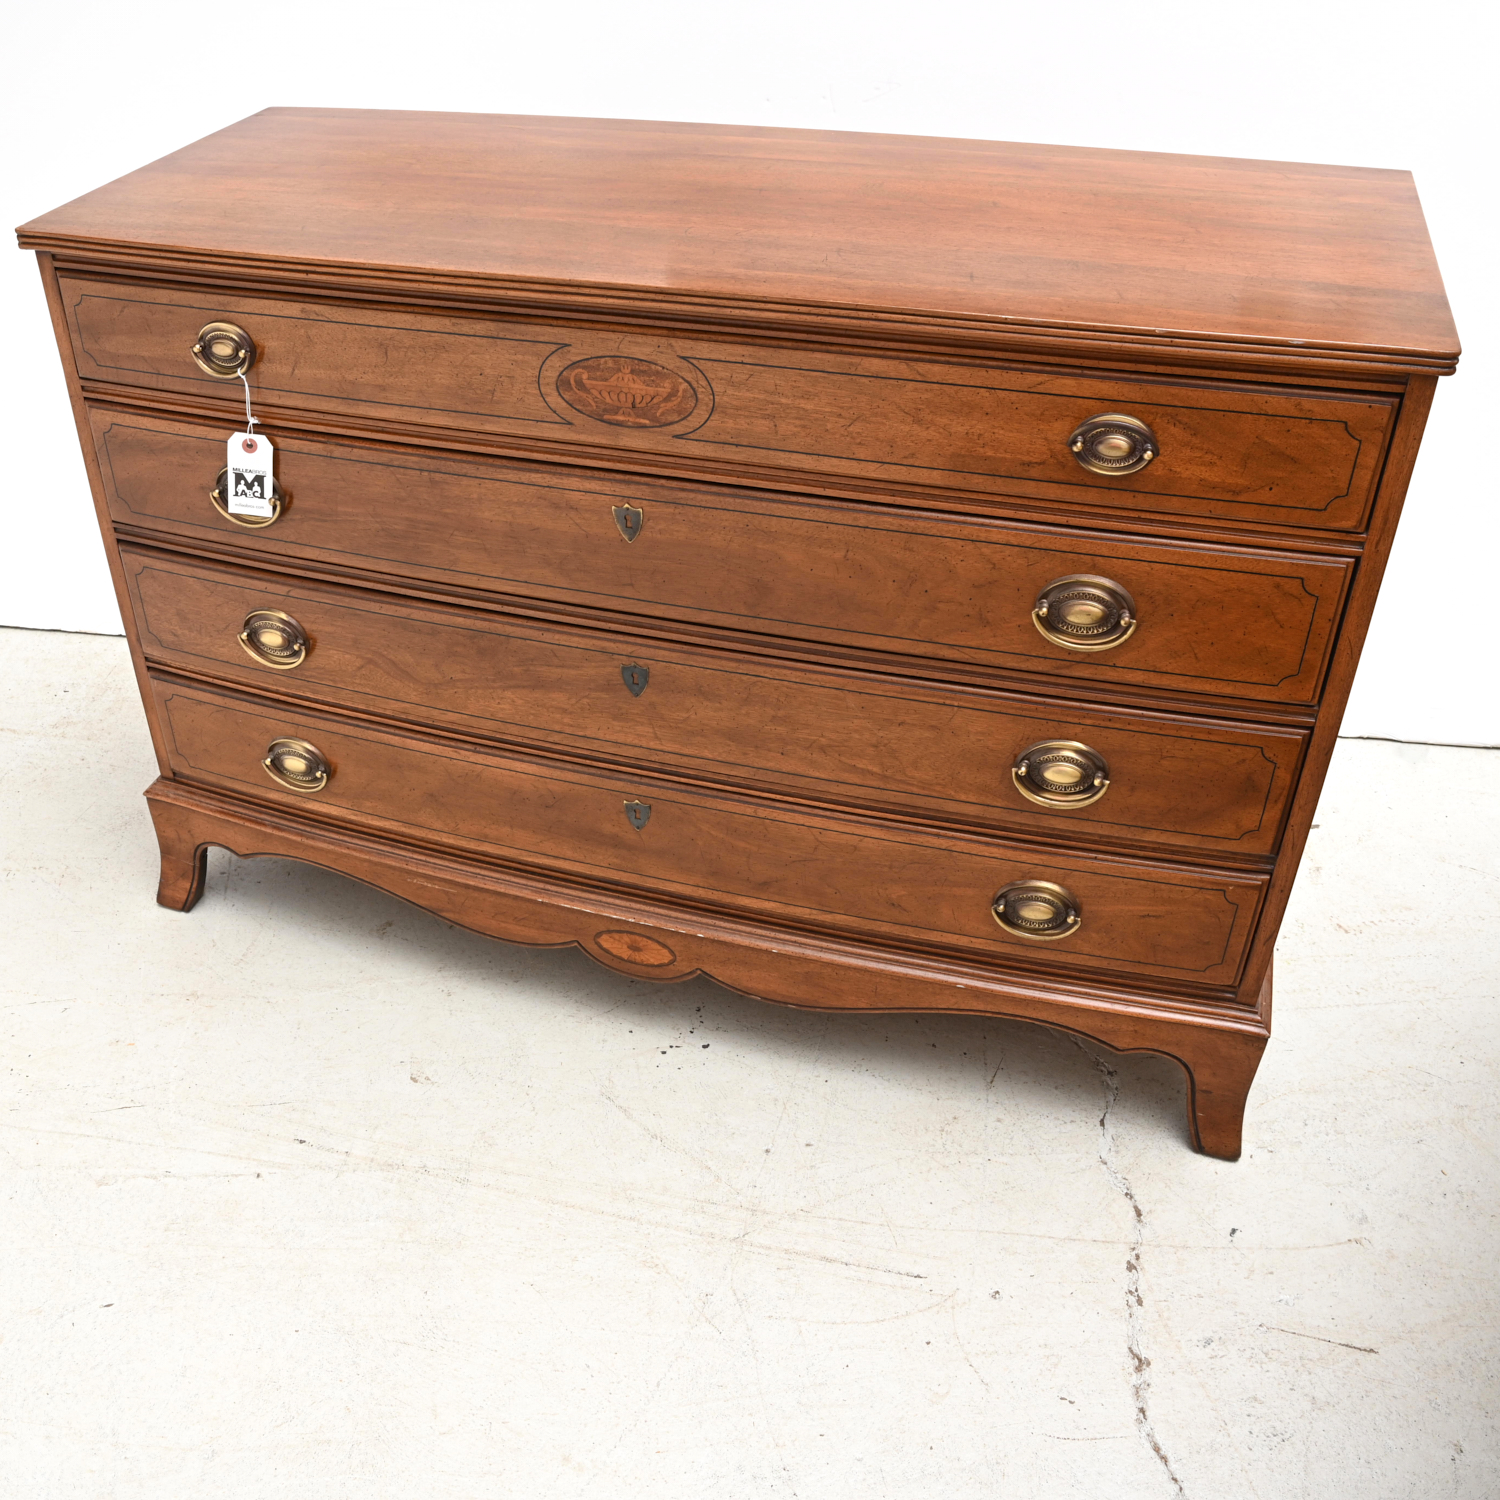 FEDERAL STYLE INLAID CHEST OF DRAWERS 2ce5ef